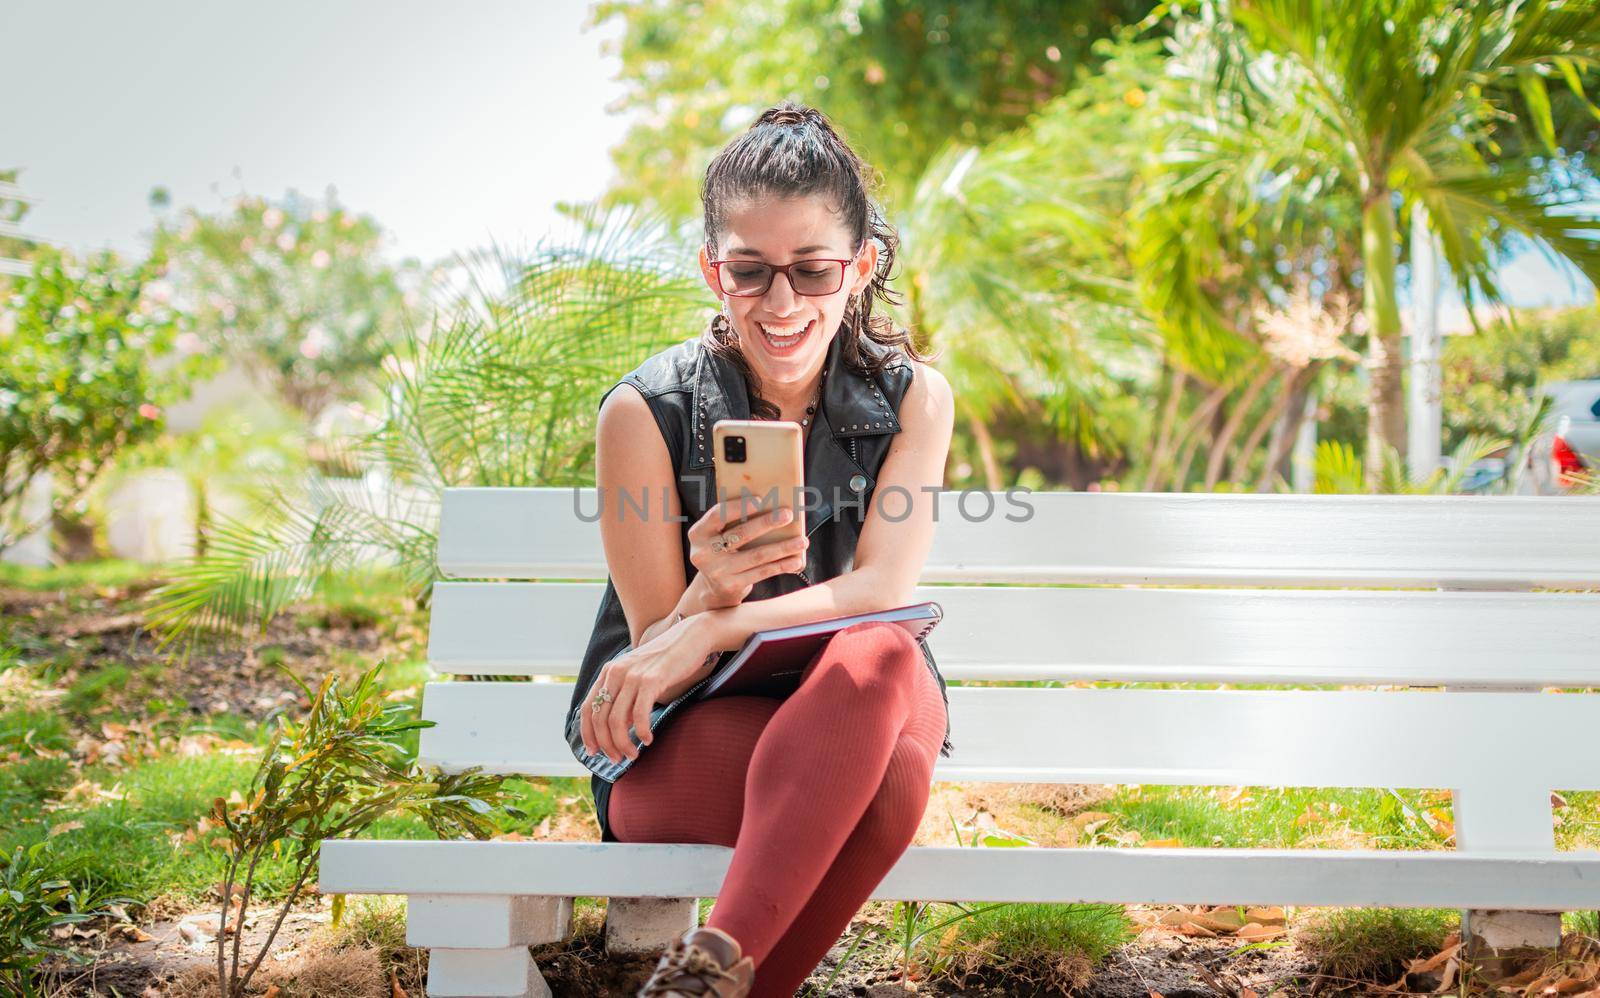 Girl sitting on a bench checking her cell phone, Happy woman sitting in a park texting on her cell phone, Woman sitting on a bench sending a text message